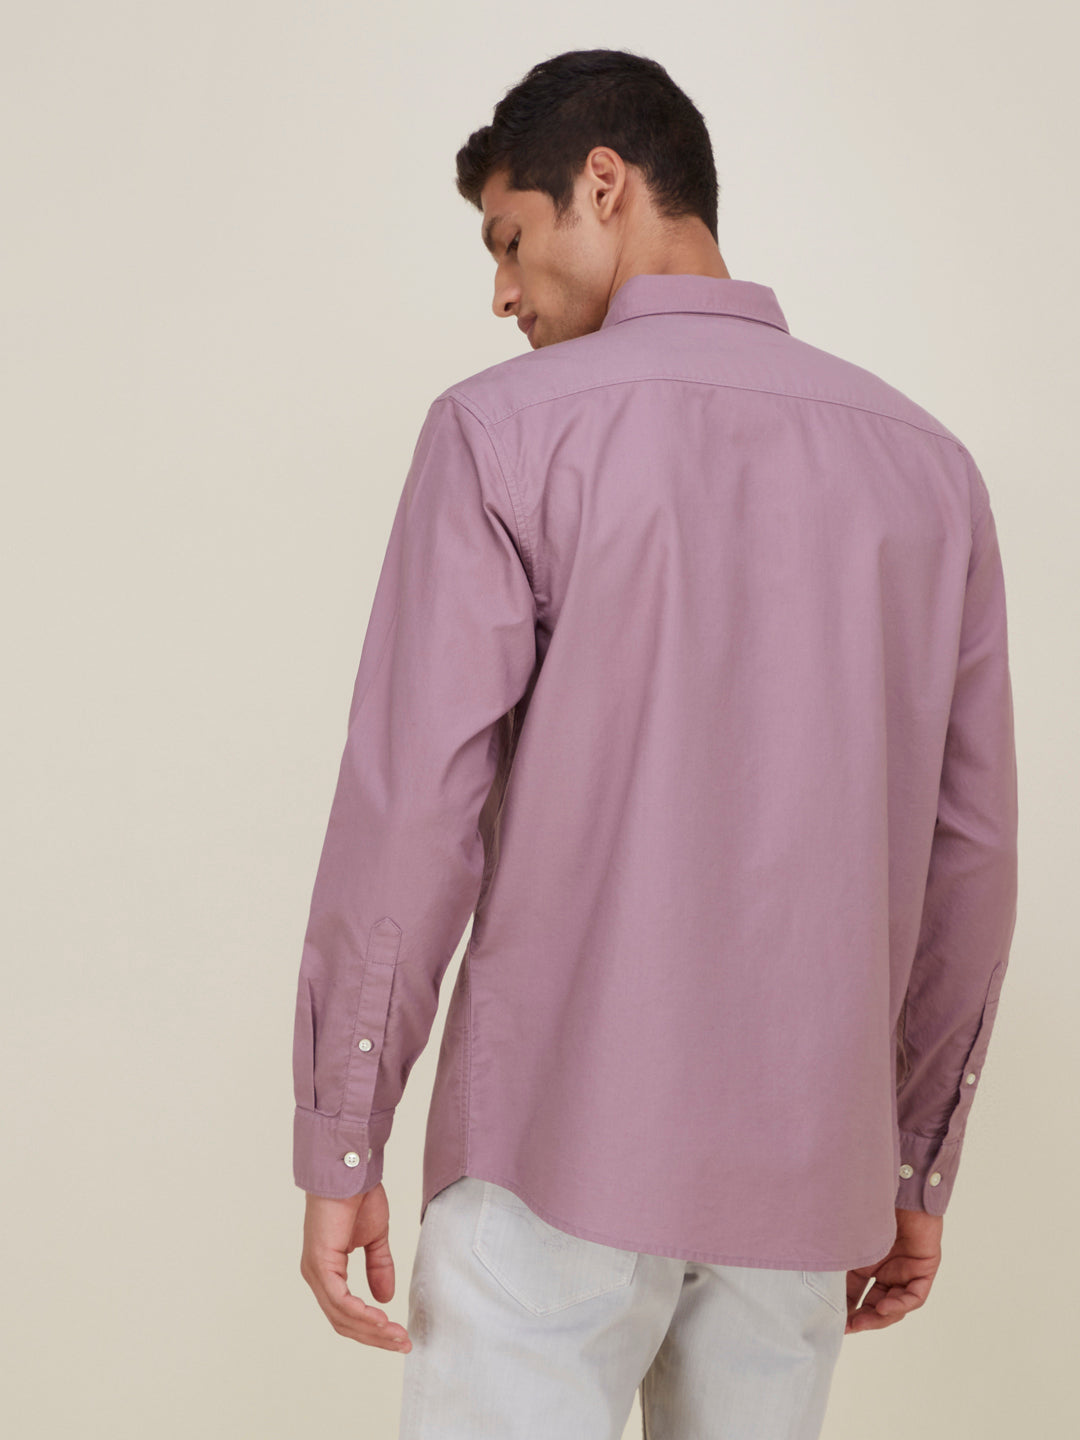 WES Casuals Mauve Relaxed-Fit Shirt | Mauve Relaxed-Fit Shirt for Men Back View - Westside